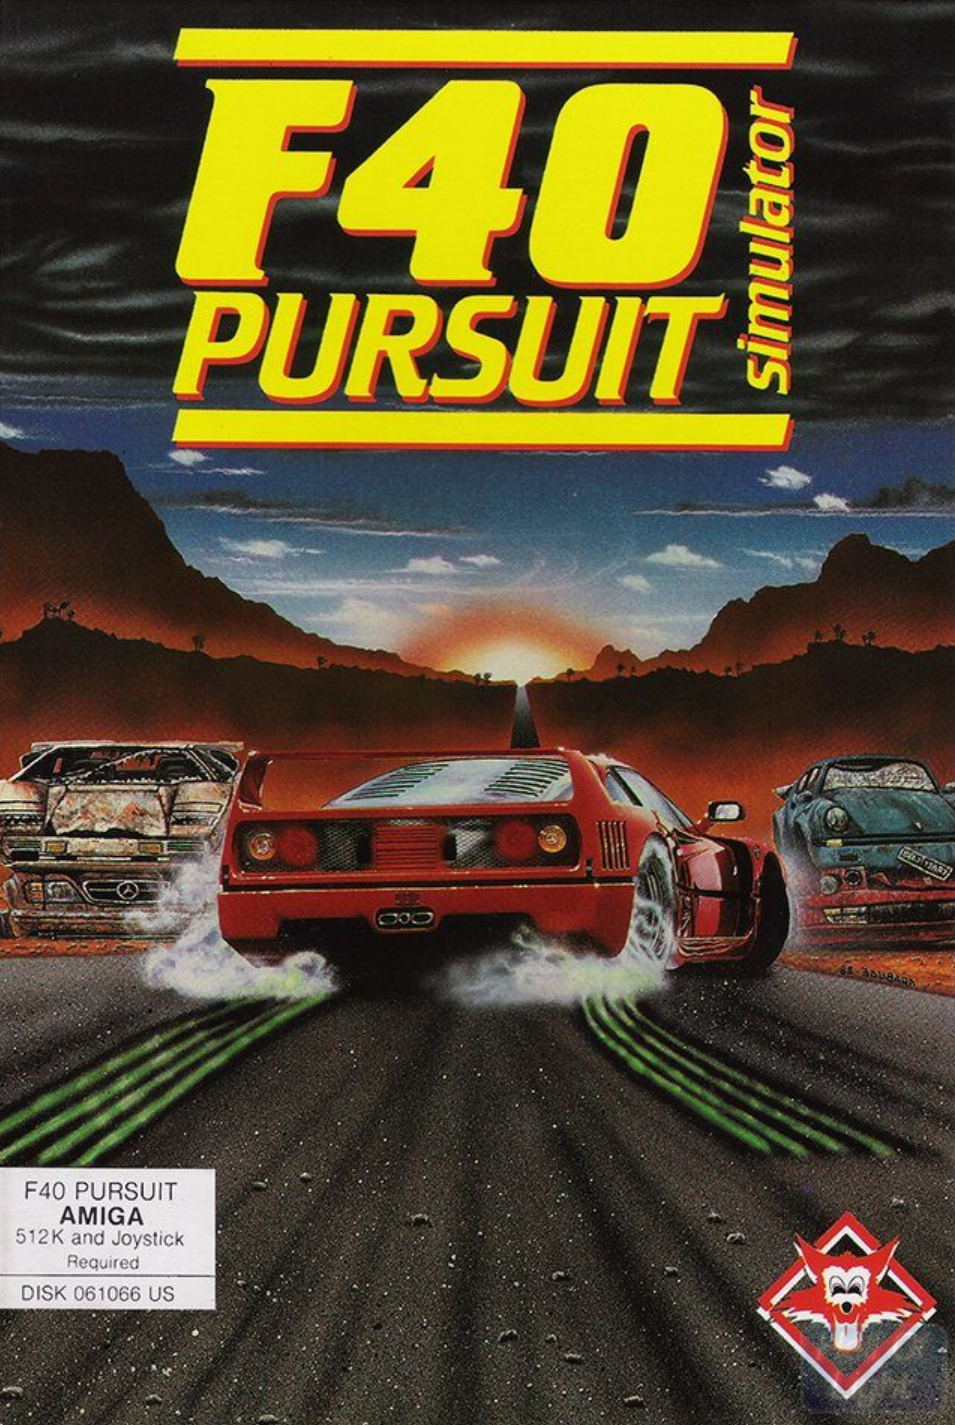 The beautiful boxart of Crazy Cars 2 by artist Grabuge, was a beautiful tribute to the first game. For the American audience, the game was renamed to F40 Pursuit simulator.